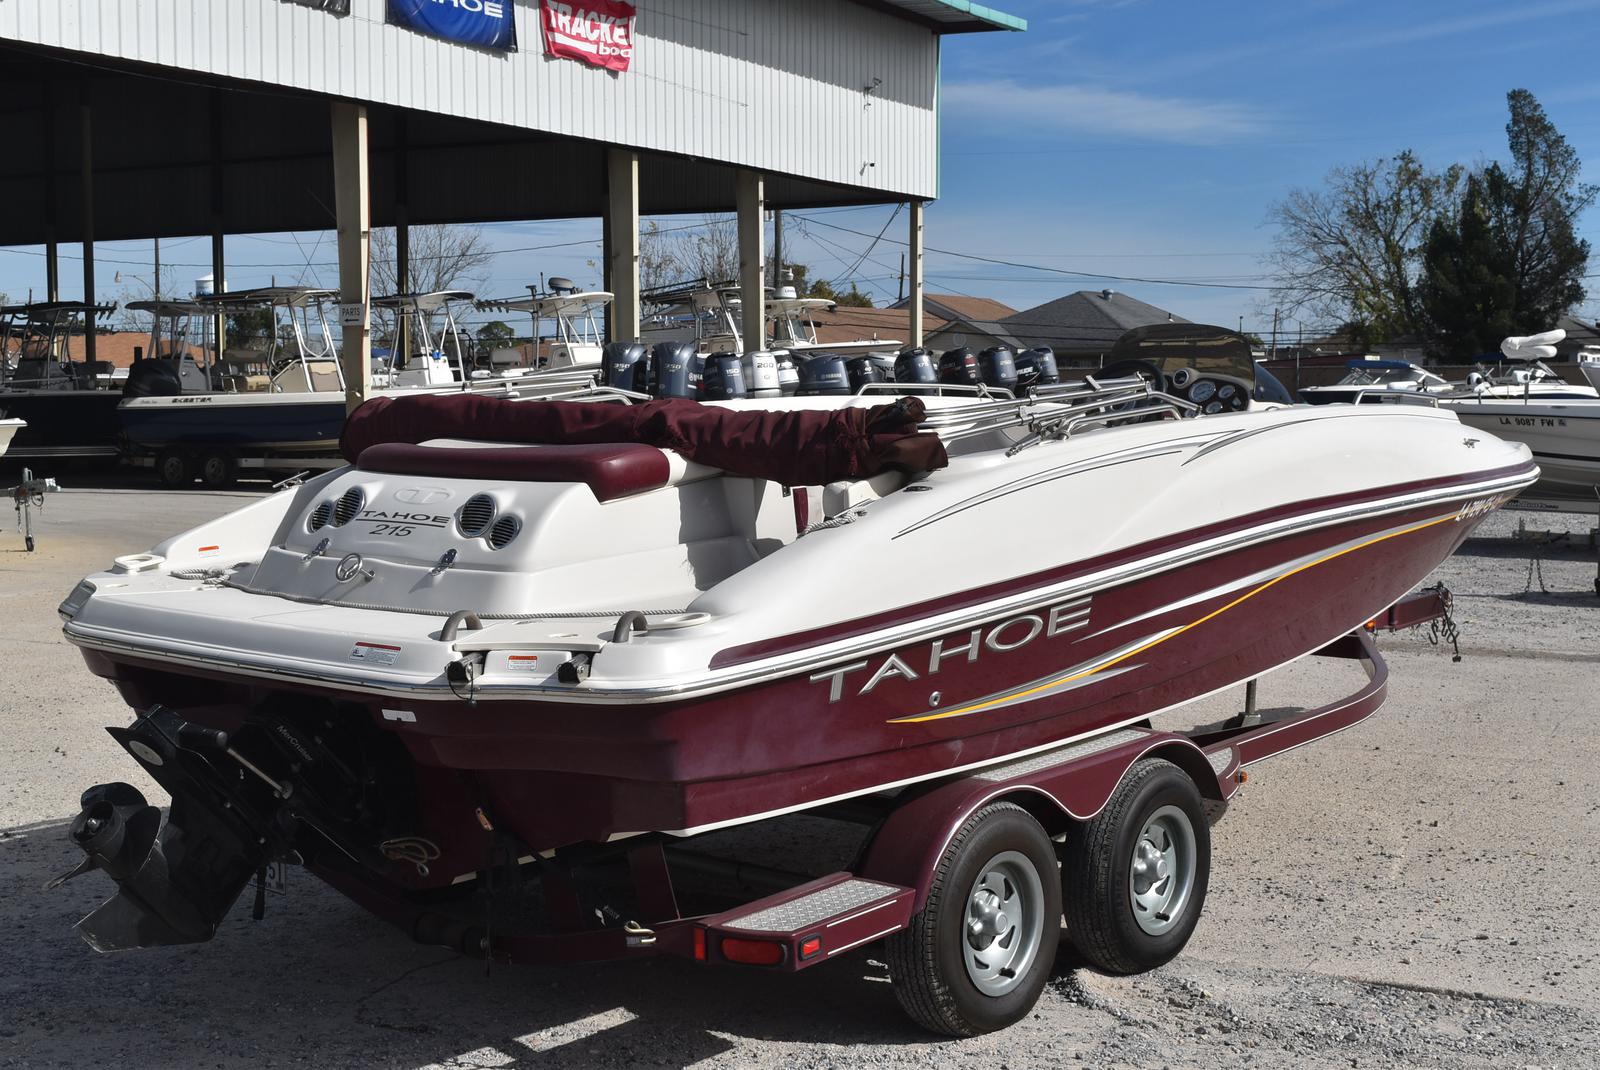 2008 Tahoe boat for sale, model of the boat is 215 & Image # 18 of 20